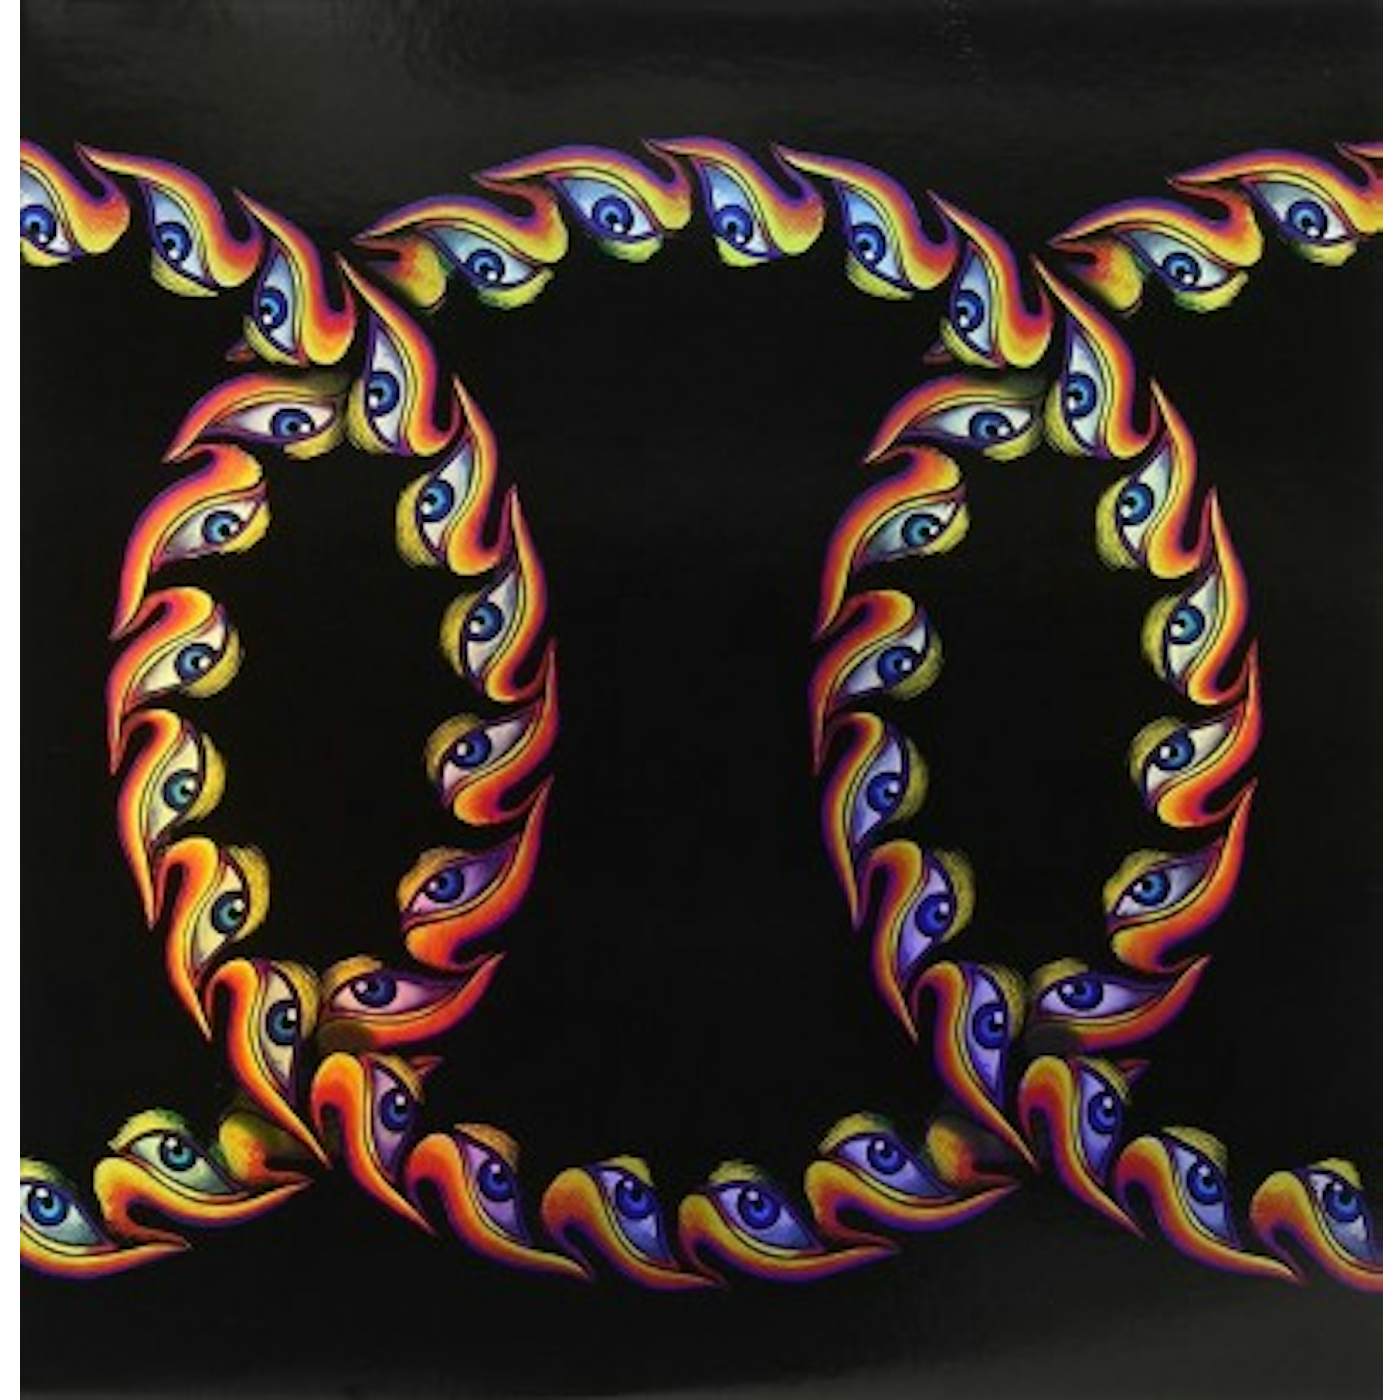 Lateralus by Tool (Record, 2005) for sale online